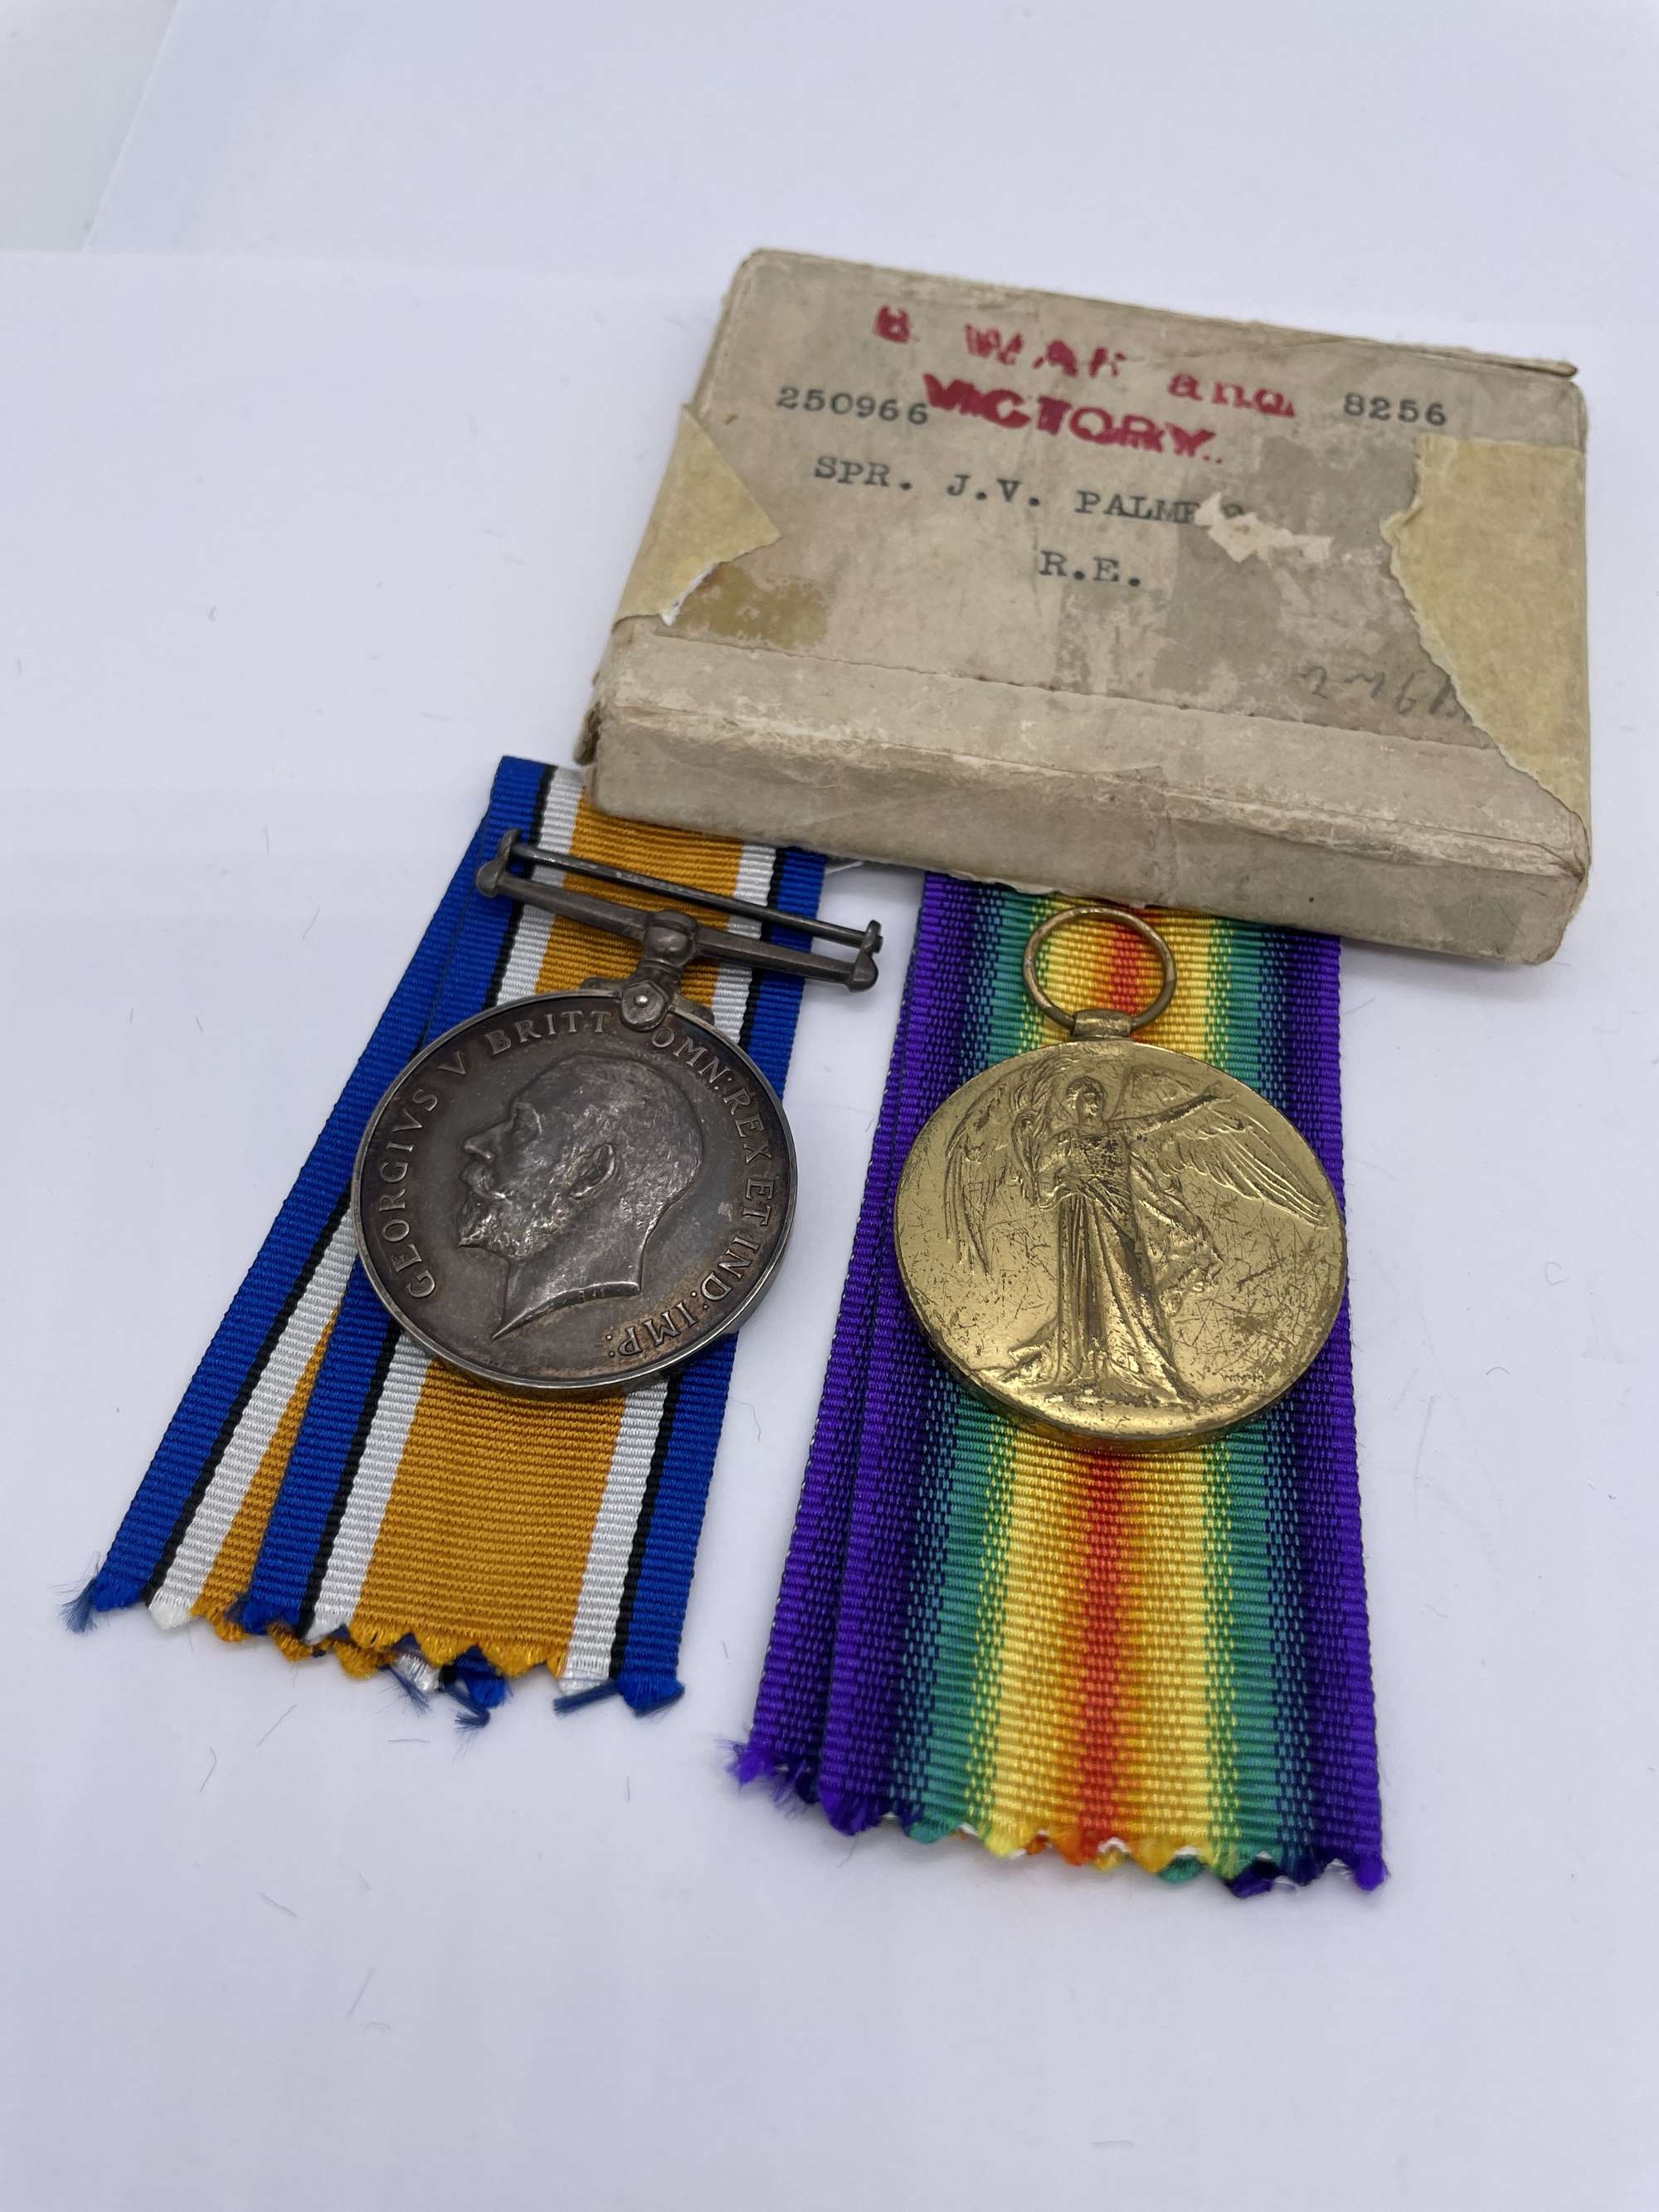 Original World War One Medal Pair, Pte Palmer, Royal Engineers, with Box of Issue